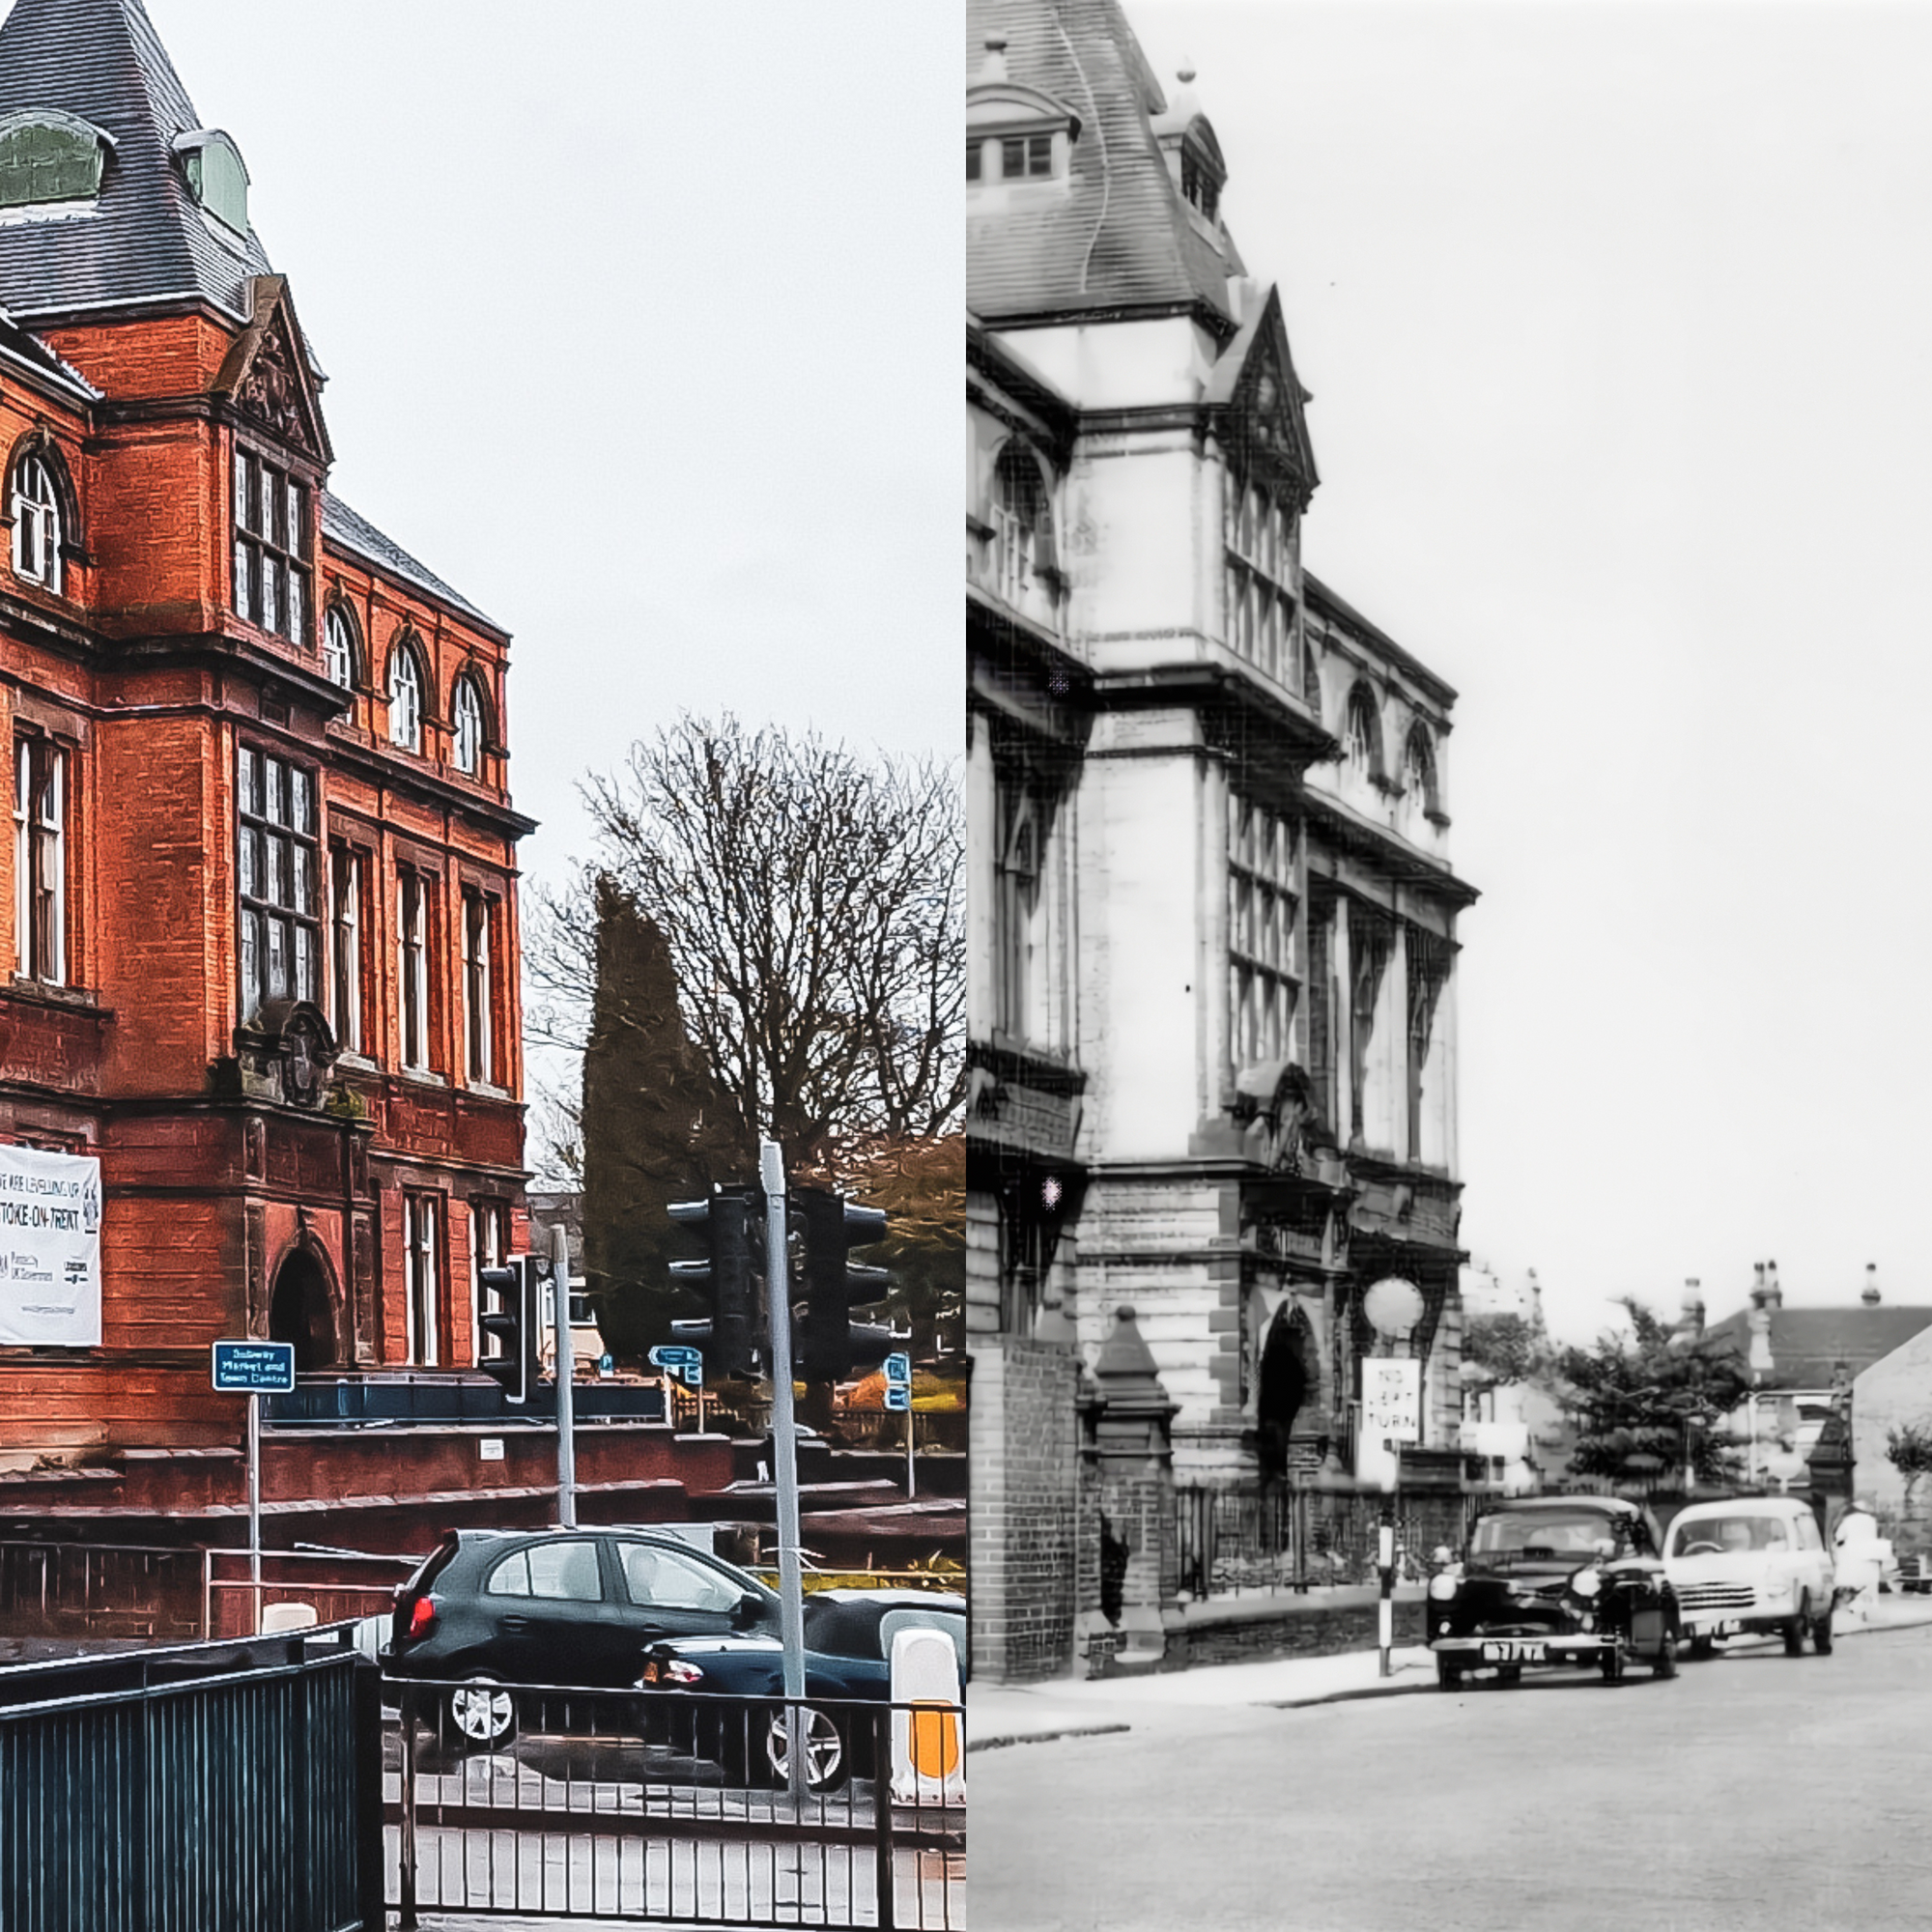 Tunstall Then & Now